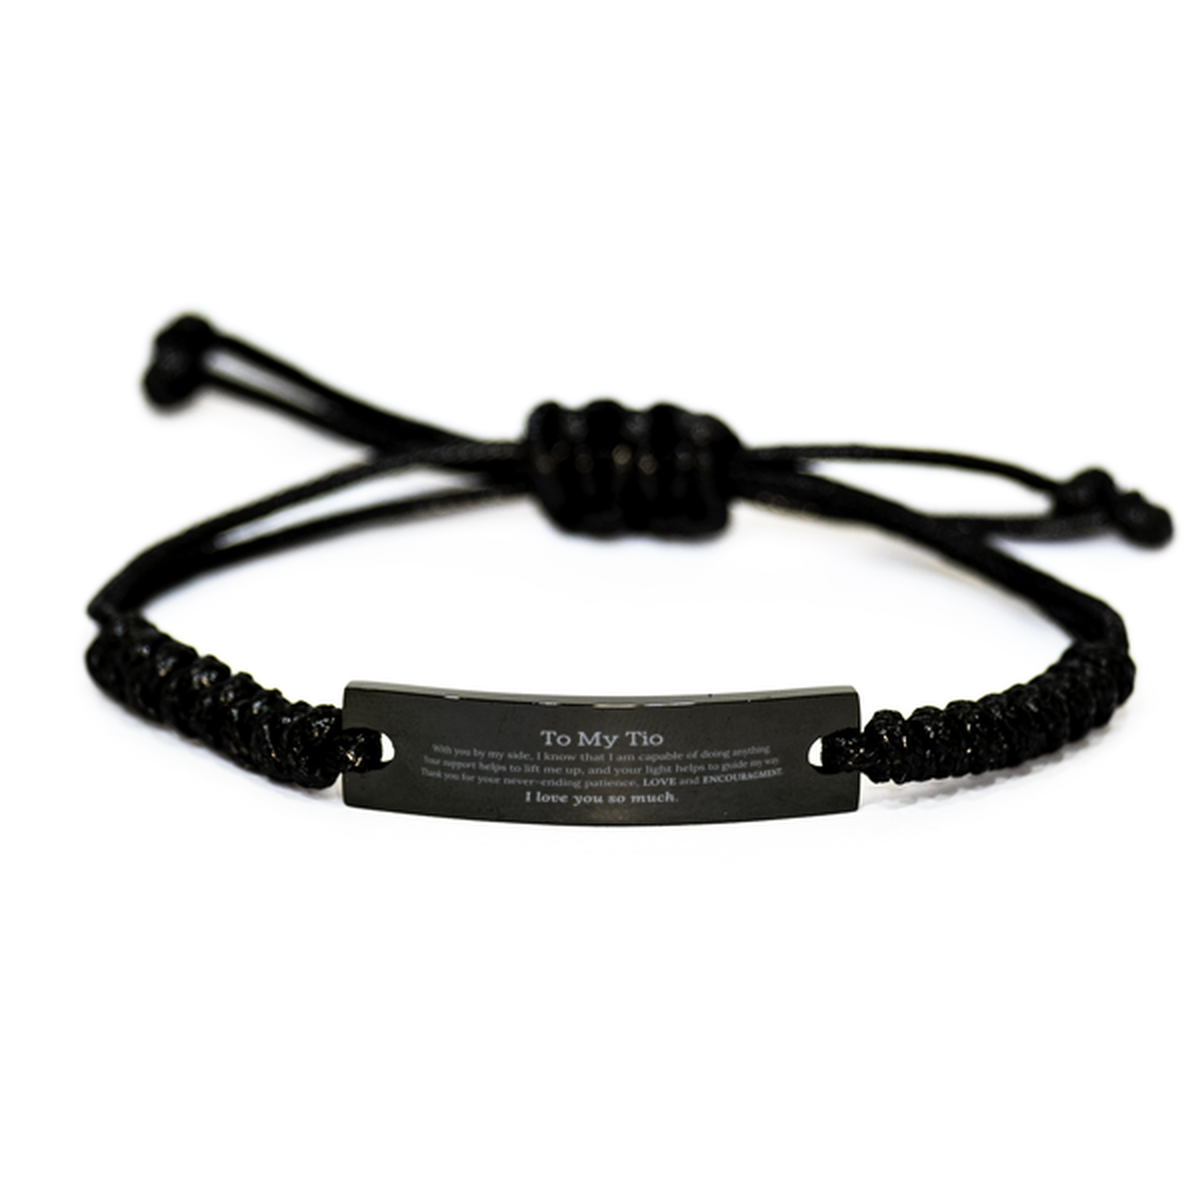 Appreciation Tio Black Rope Bracelet Gifts, To My Tio Birthday Christmas Wedding Keepsake Gifts for Tio With you by my side, I know that I am capable of doing anything. I love you so much